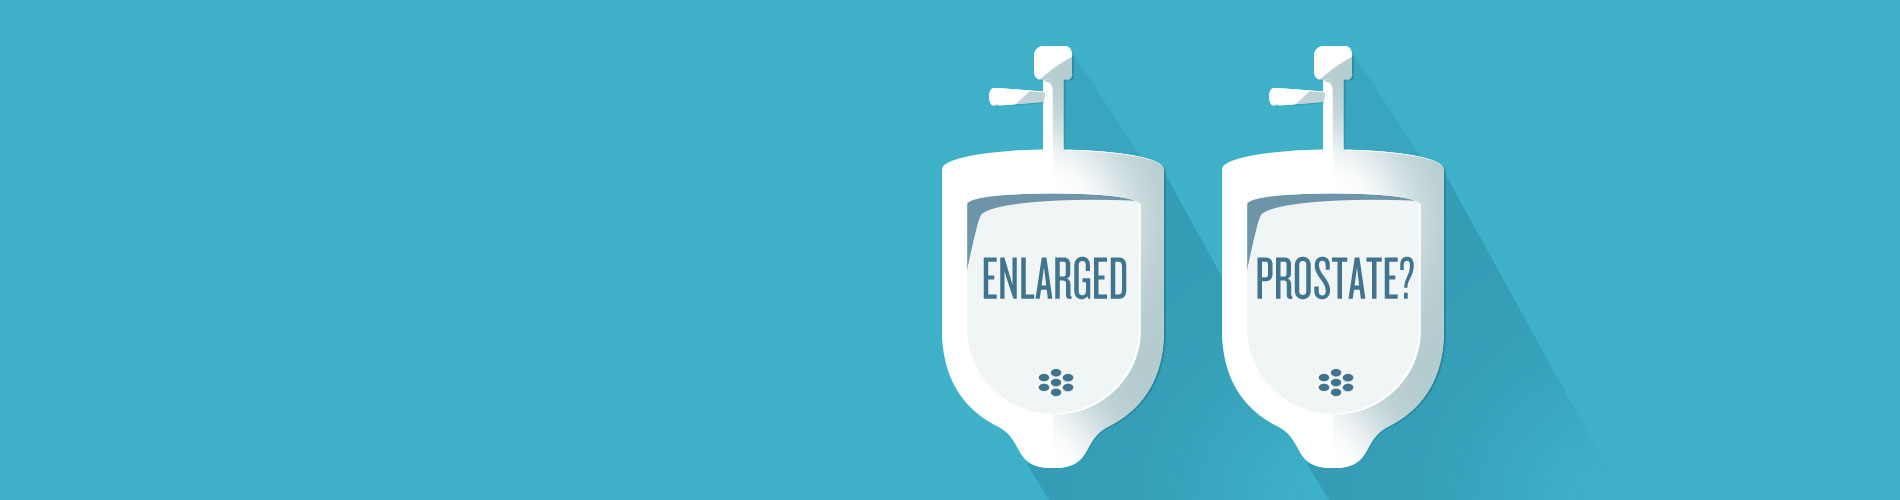 Illustration of urinals with "Enlarge Prostate?" text.